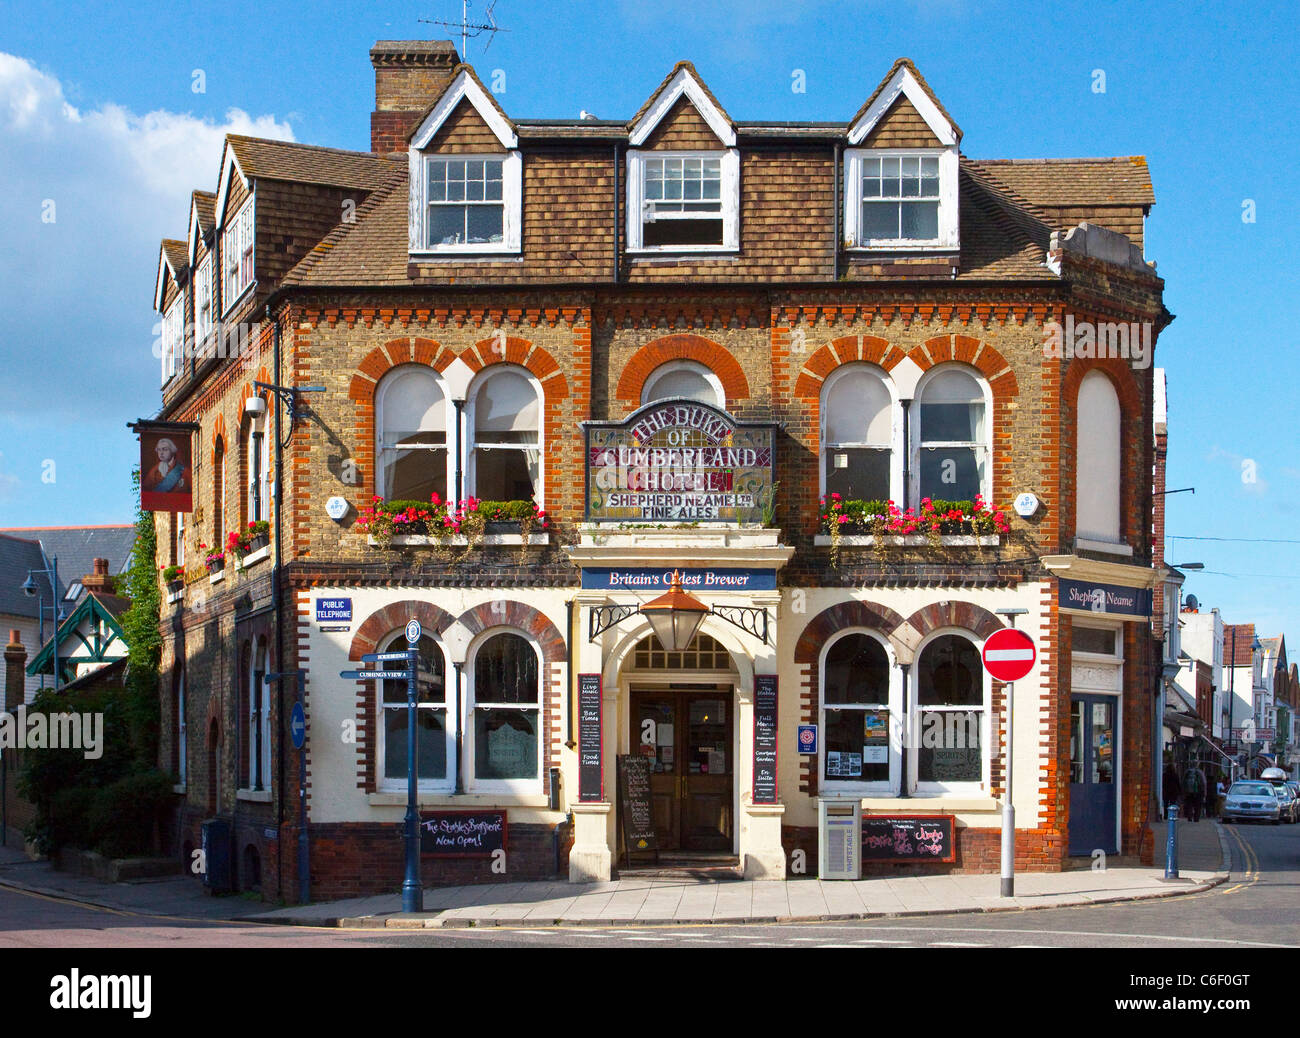 Il duca di Cumberland Public House, Whitstable,Kent, Inghilterra Foto Stock